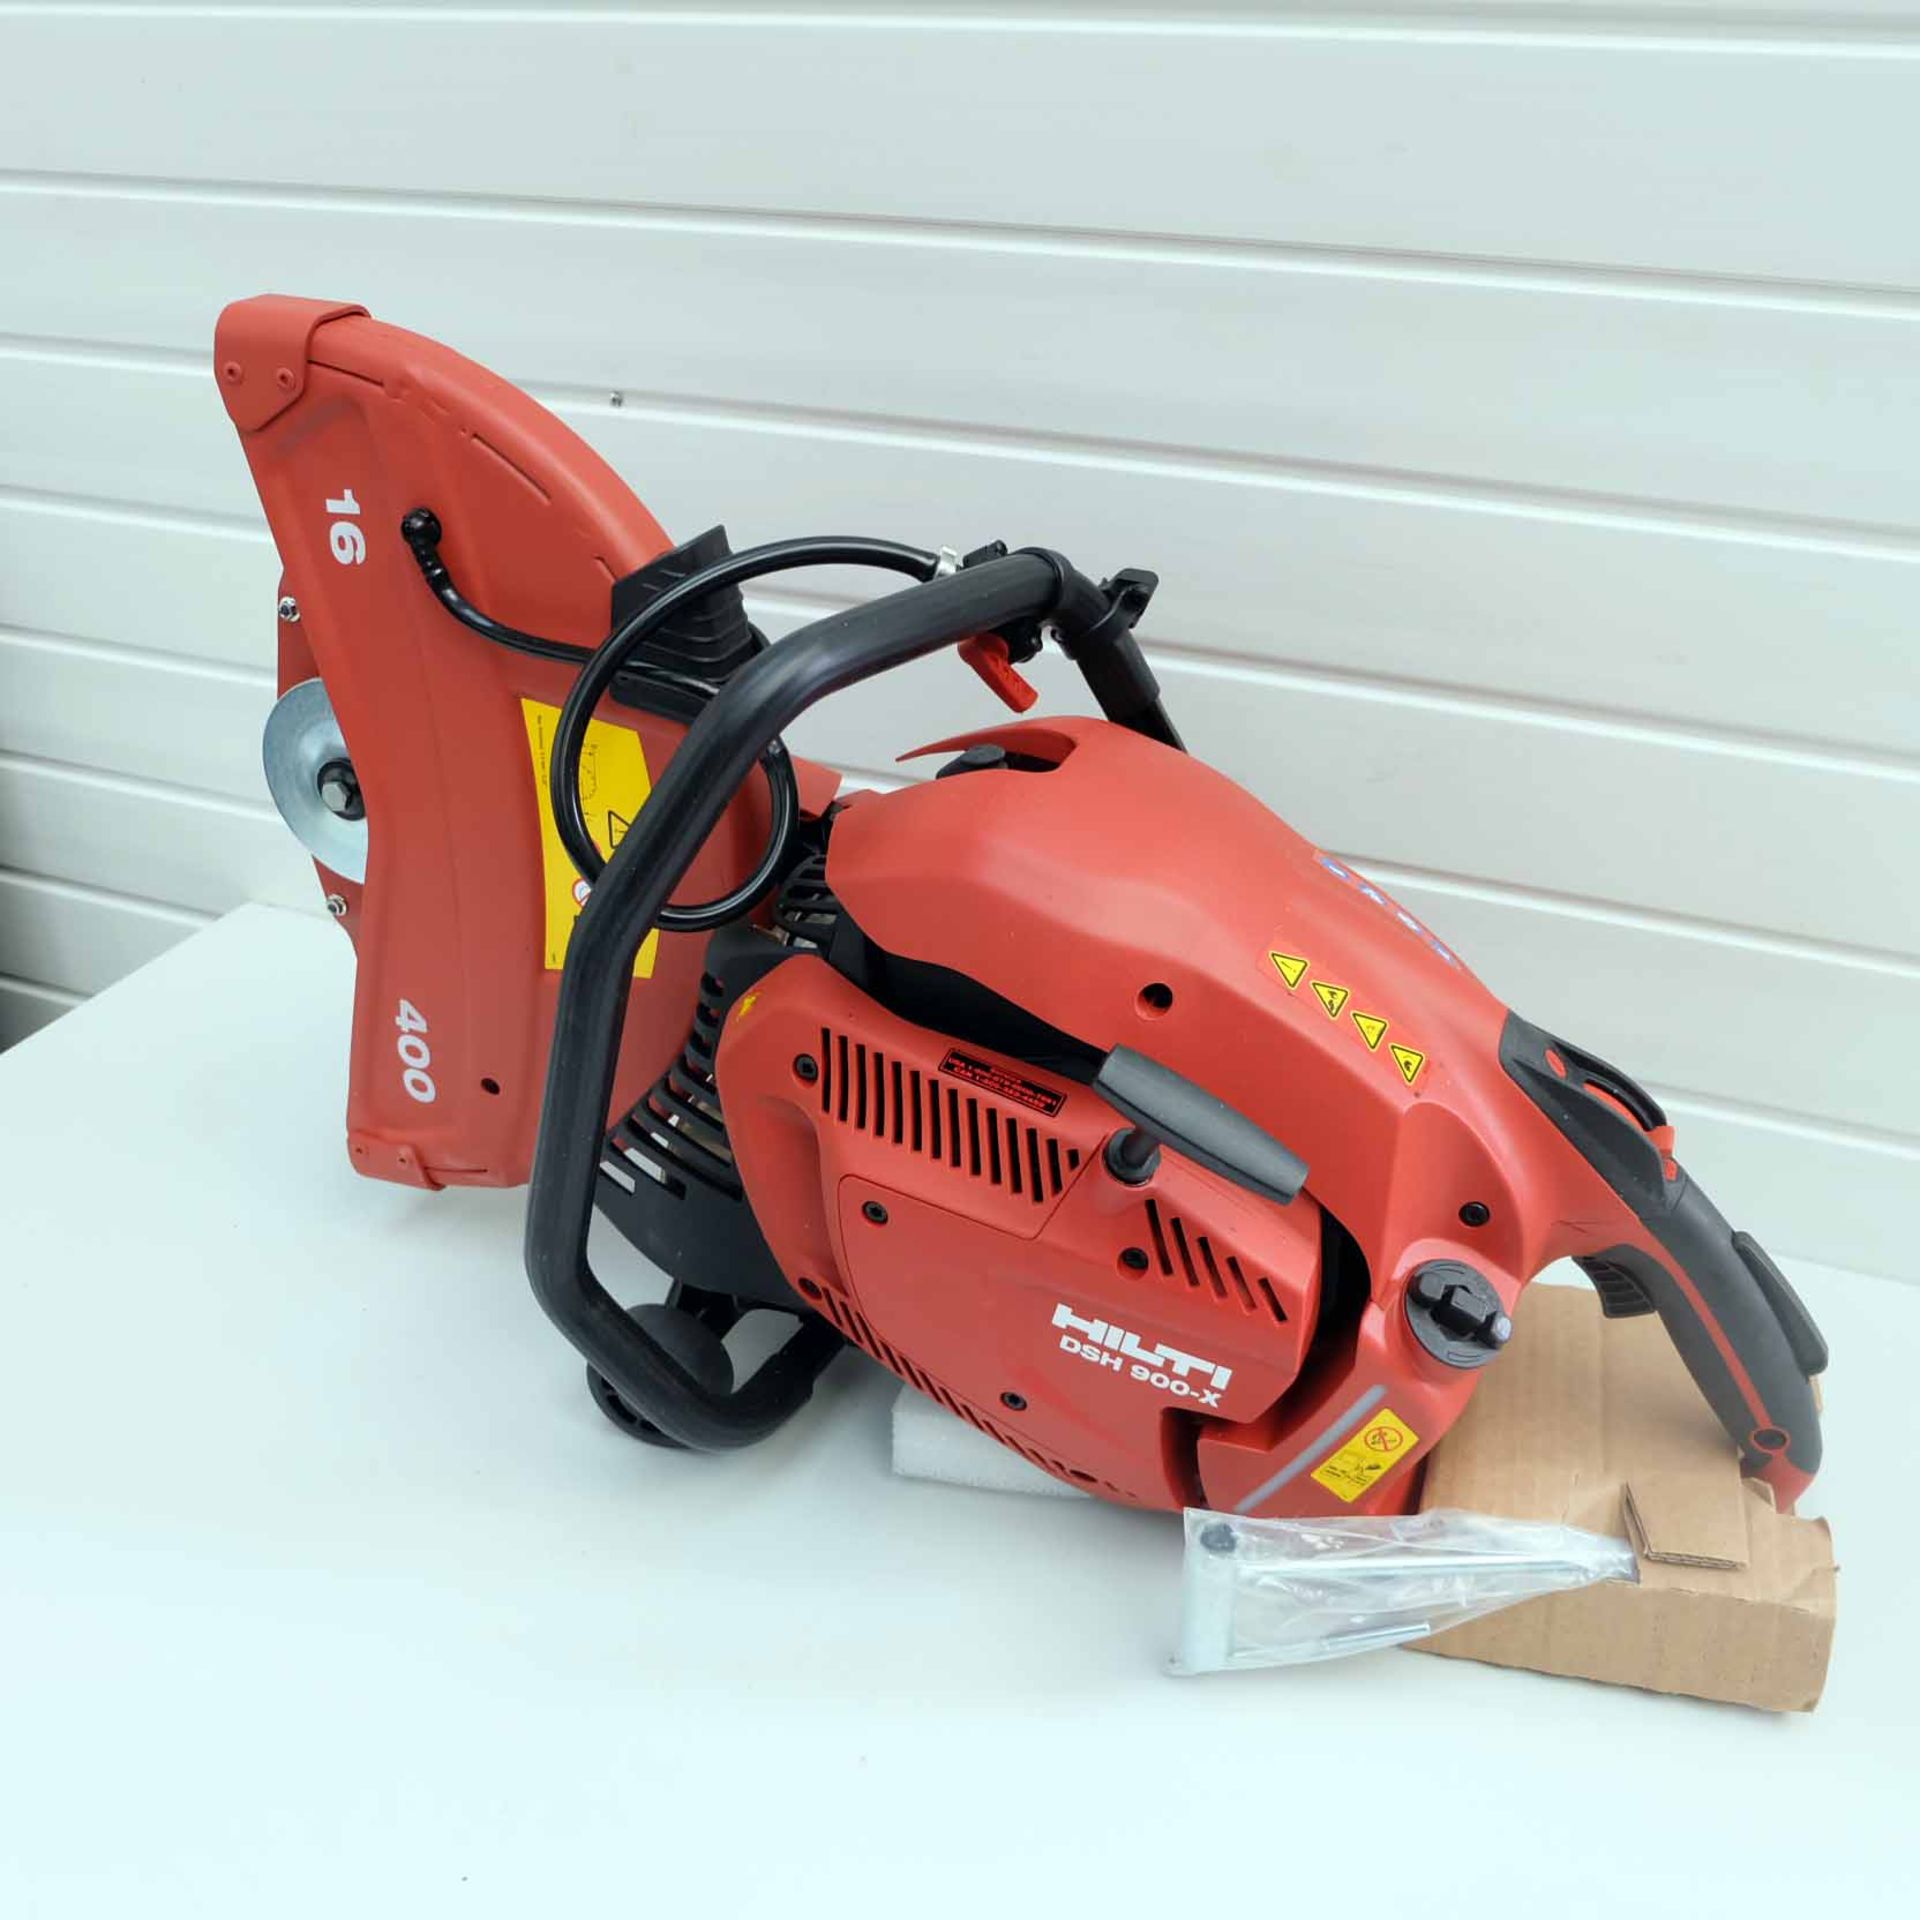 Hilti Hand Held Gas Saw. Model DSH 900-X 16". Complete With SP-16"x1" Blade. Easy Start Auto-Choke S - Image 4 of 25